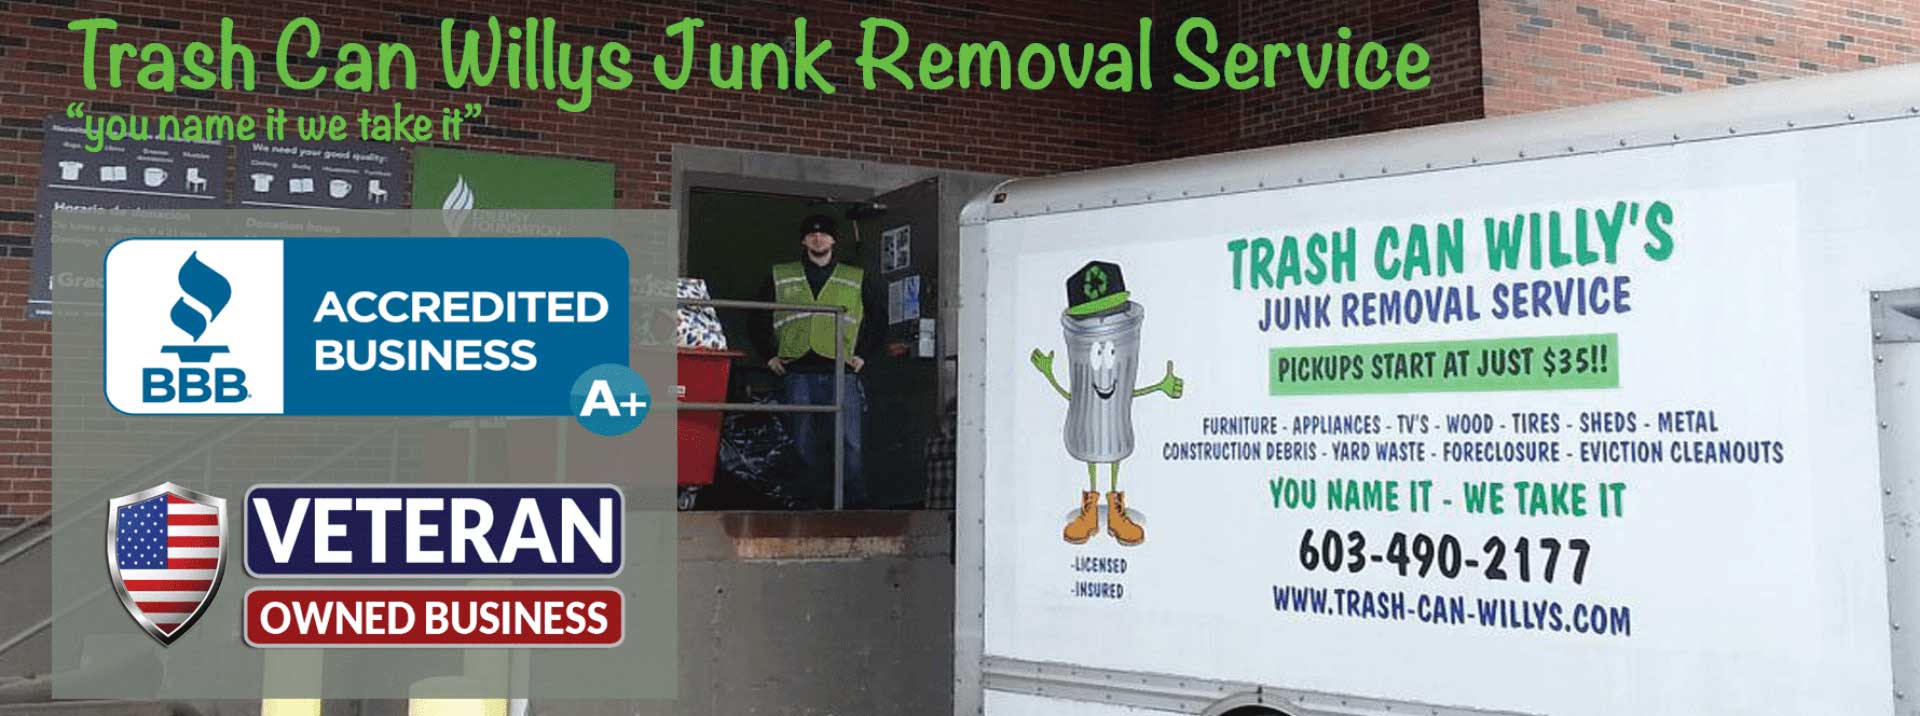 junk removal junk hauling new hampshire manchester exeter salem laconia